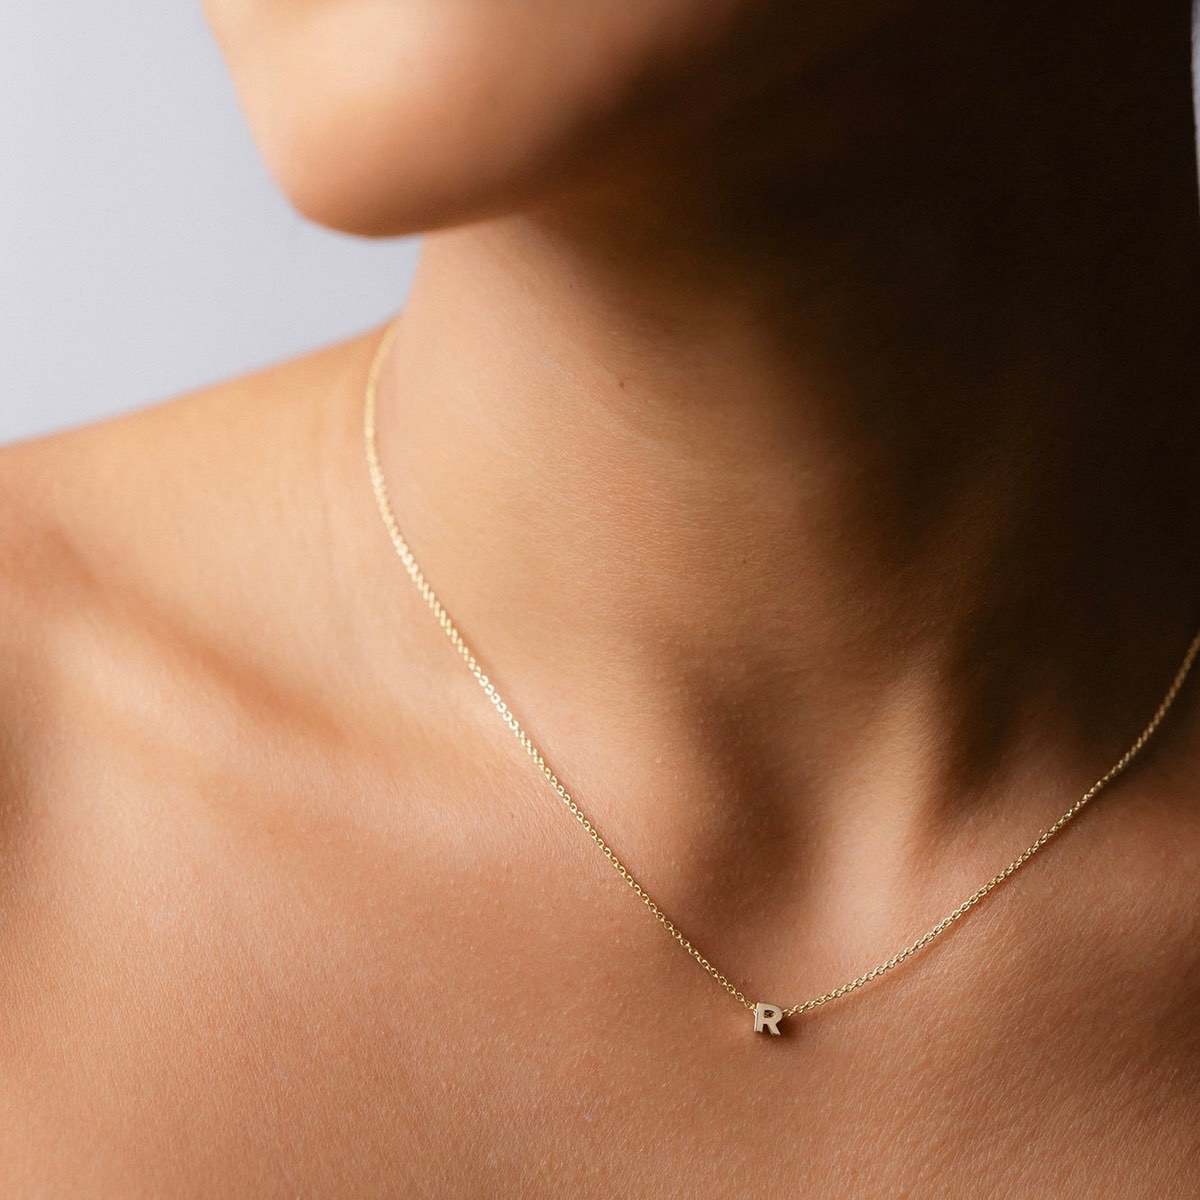 Hand finished solid gold letter necklace: Close up of a model wearing our beautiful 9ct yellow gold Tiny Letter R Charm Necklace with a 40cm cable chain